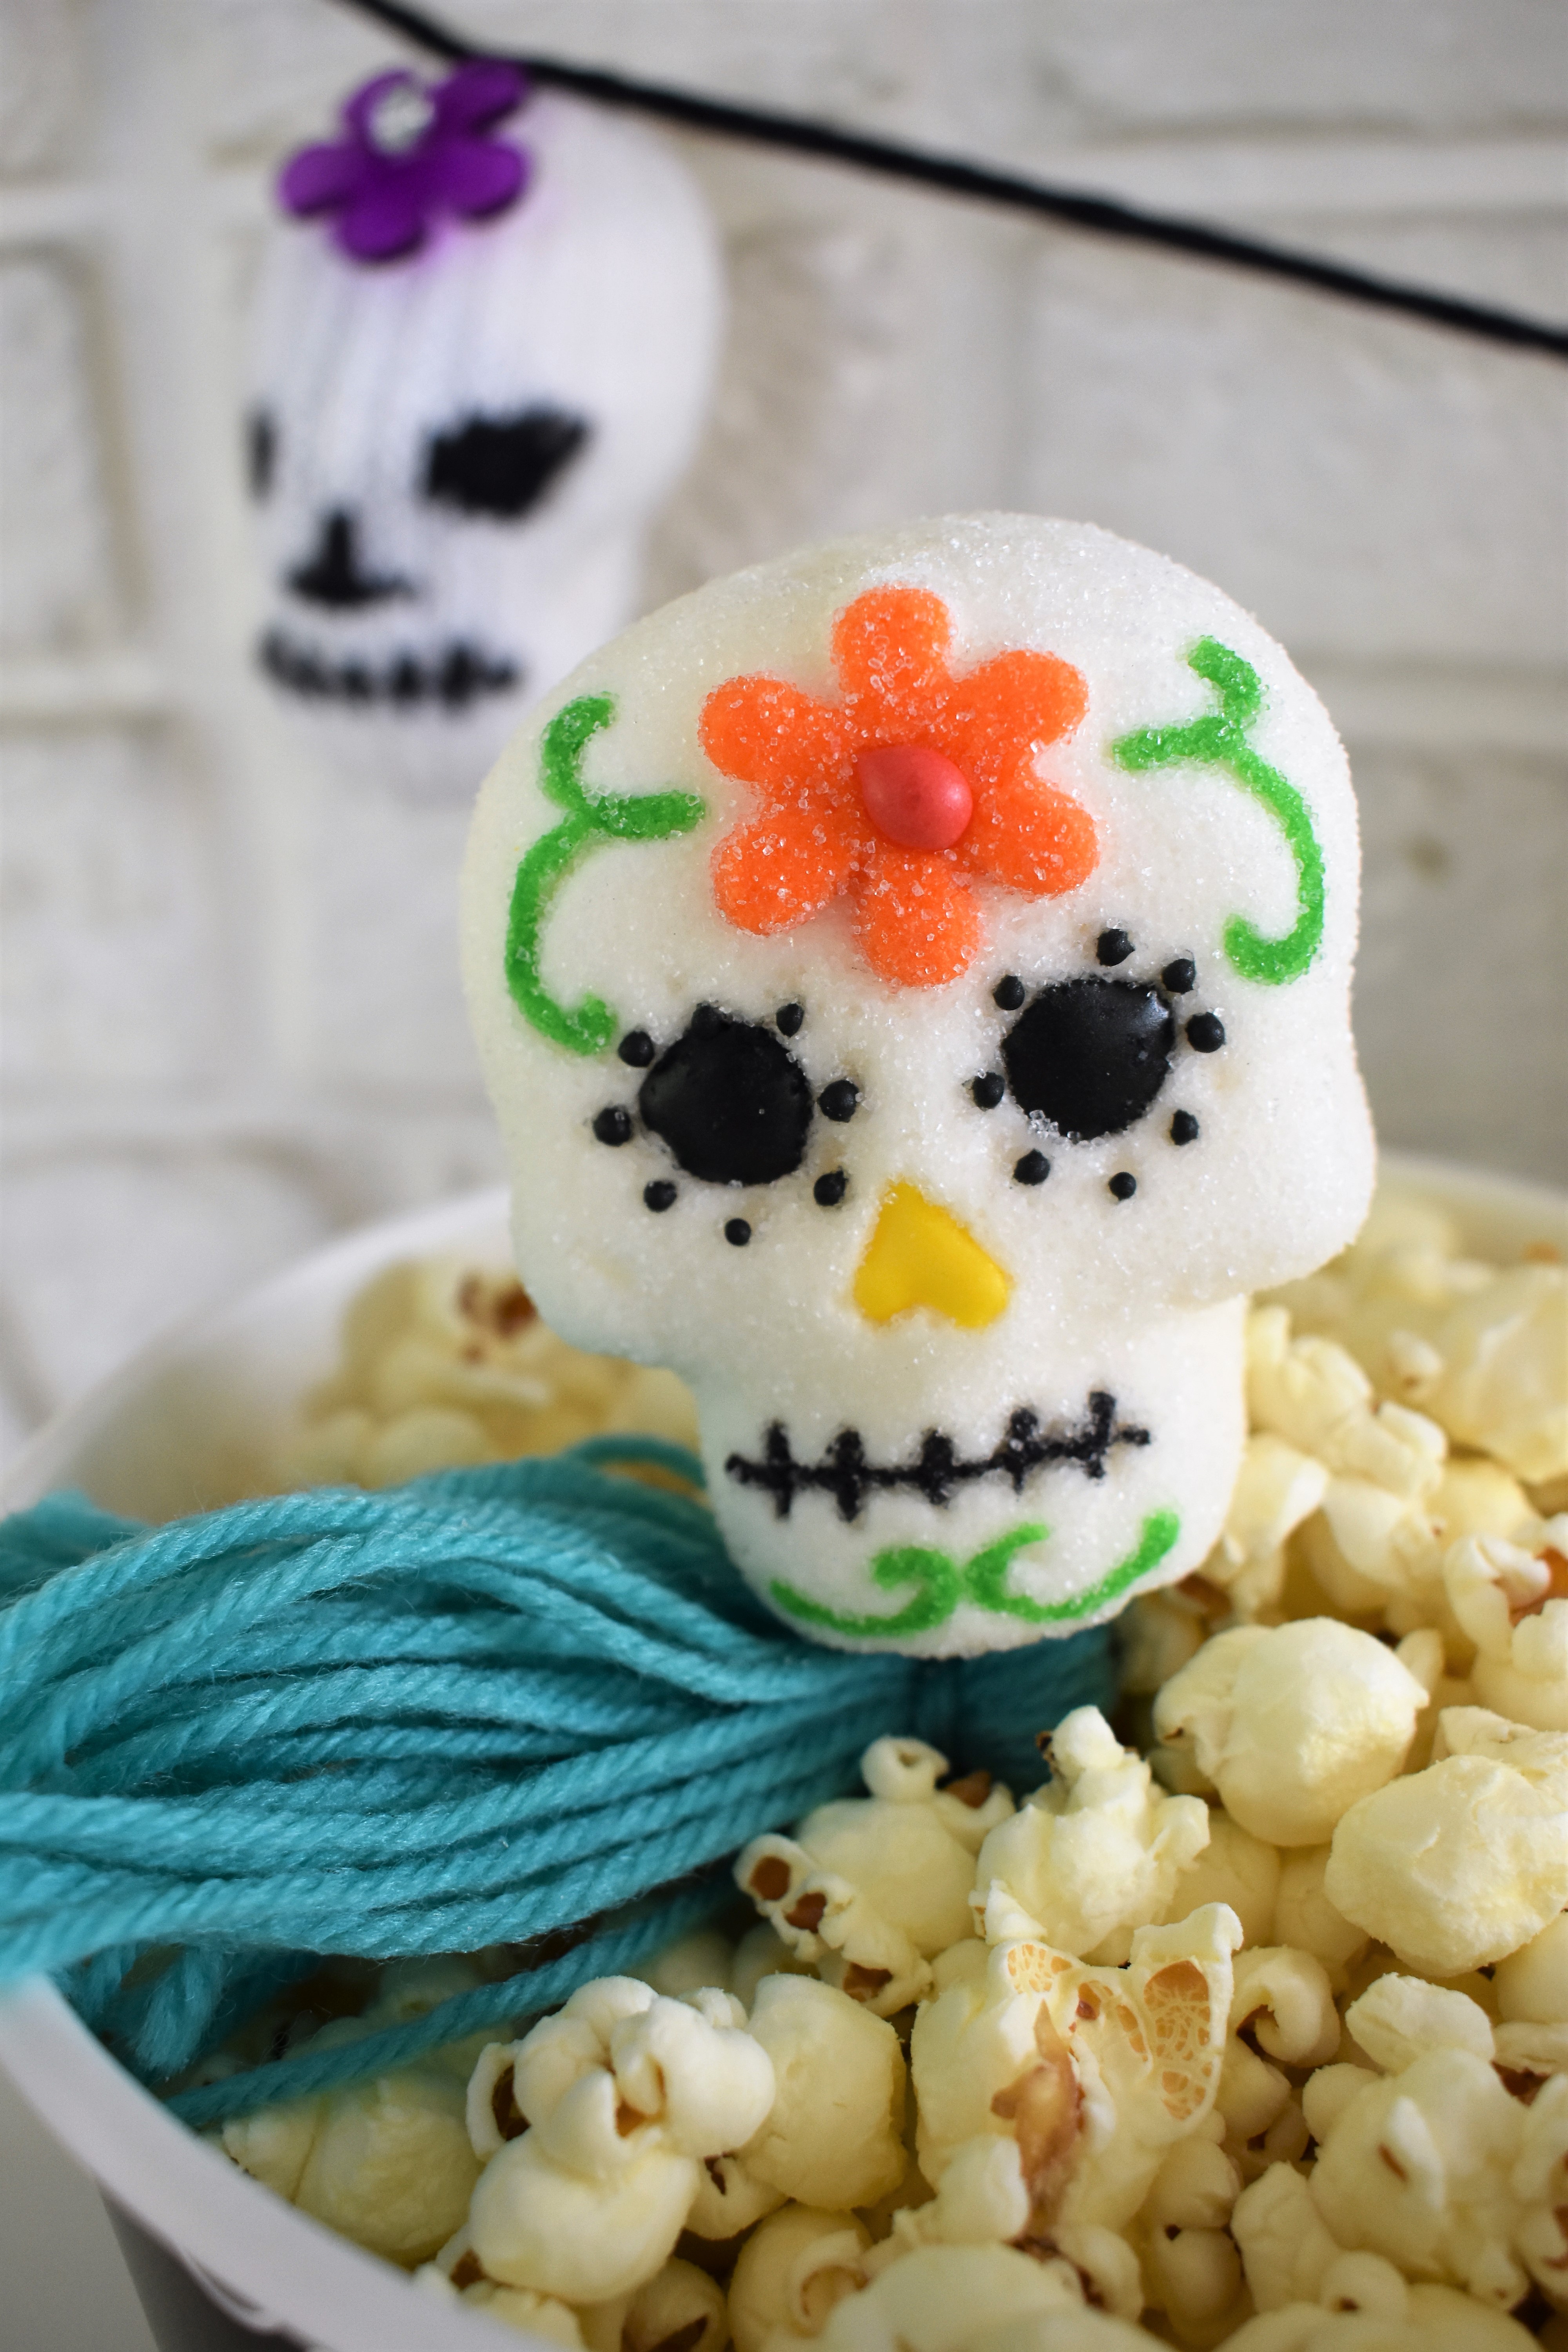 Day of the Dead treats